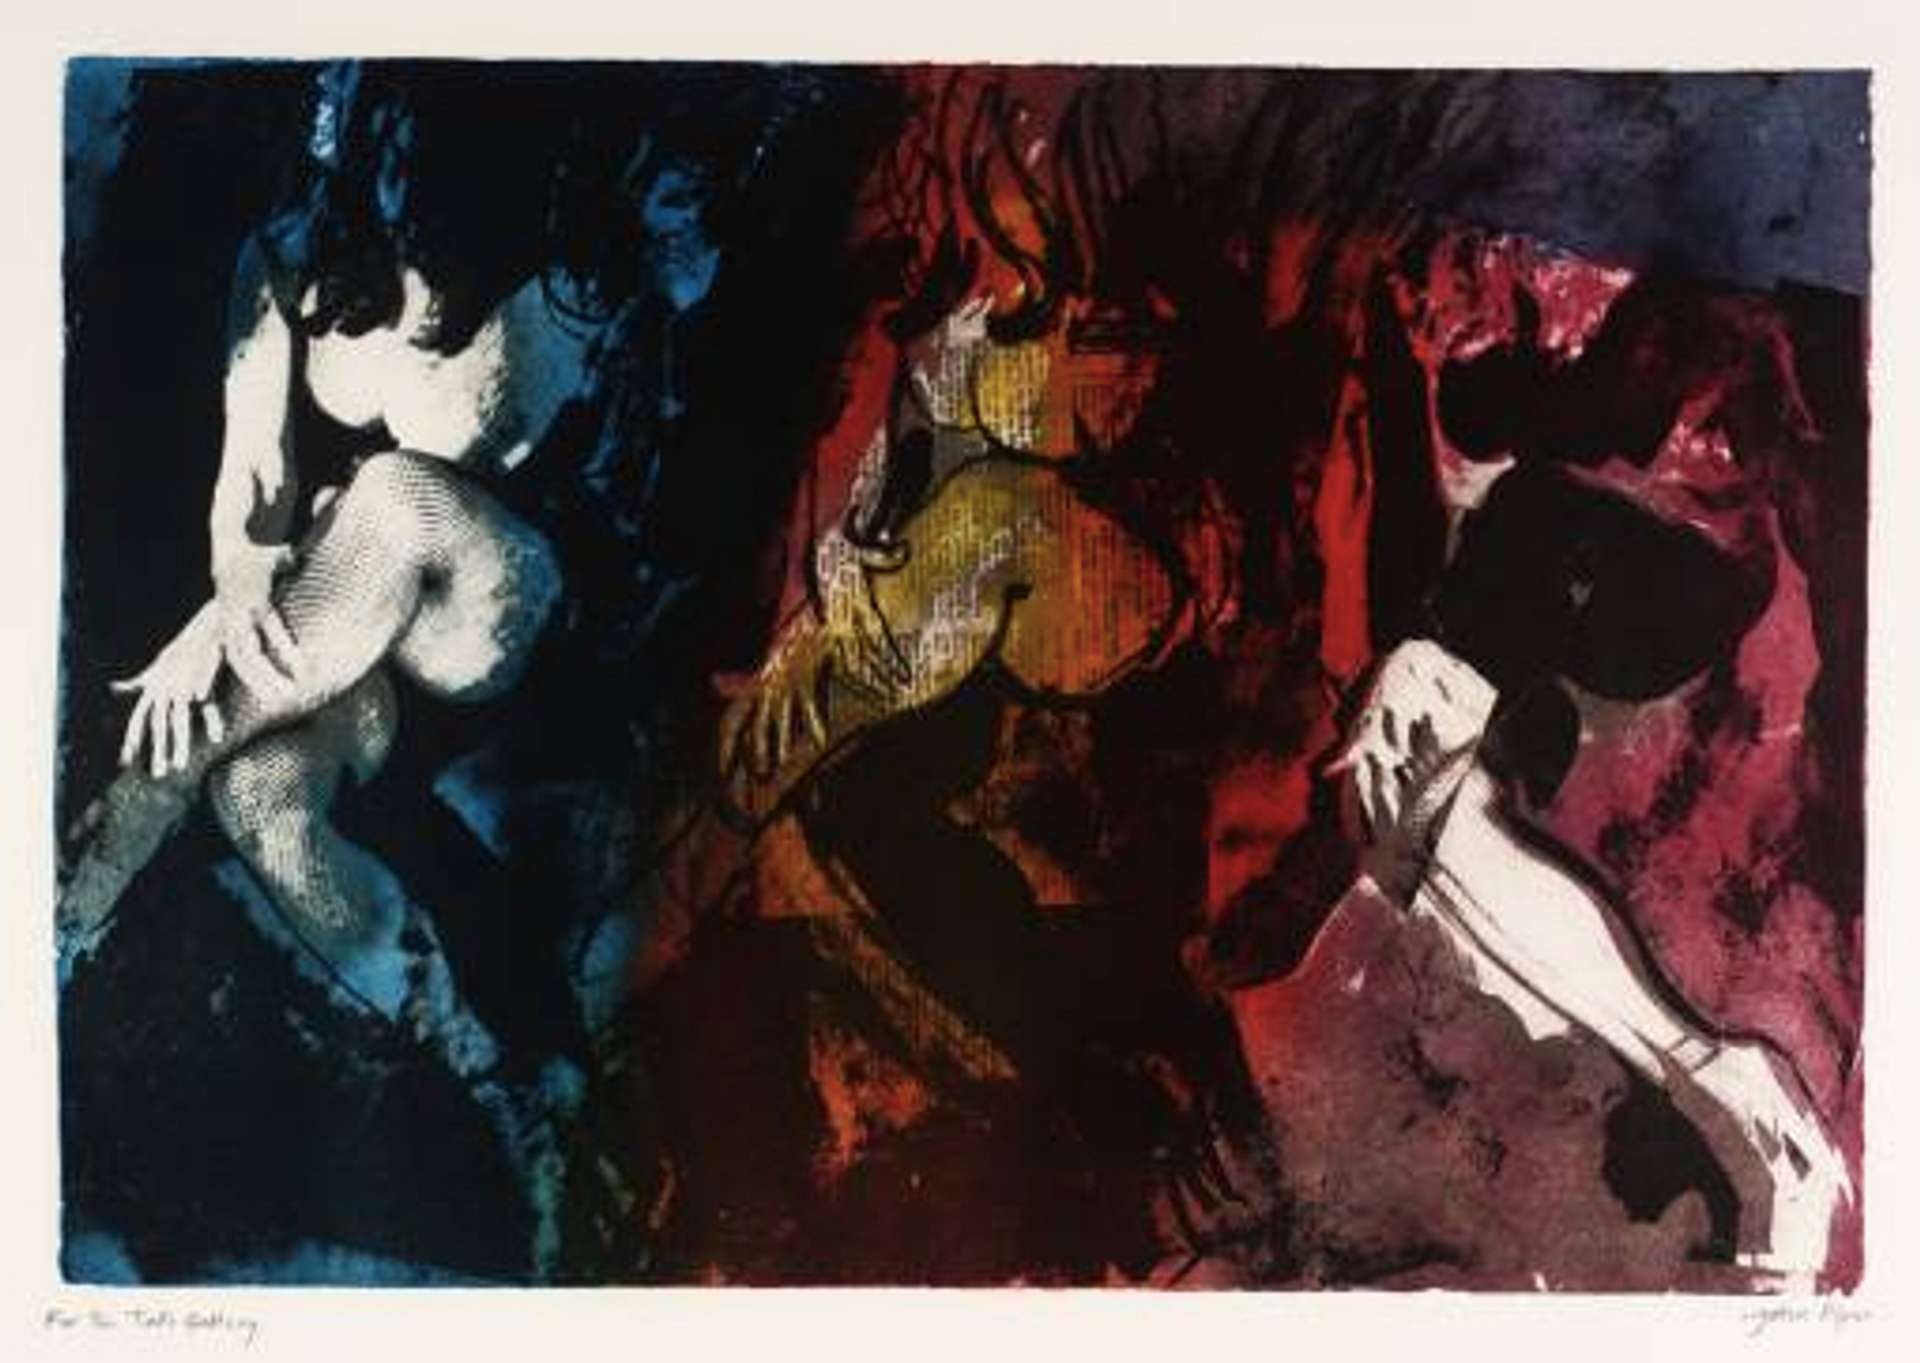 Collaged print showcasing three negative photographic proofs of a seated woman. The woman is nude, with crossed legs and her arm resting on her shin. The composition starts with a blue gradient and transitions to warmer hues from left to right, creating a visually dynamic effect.